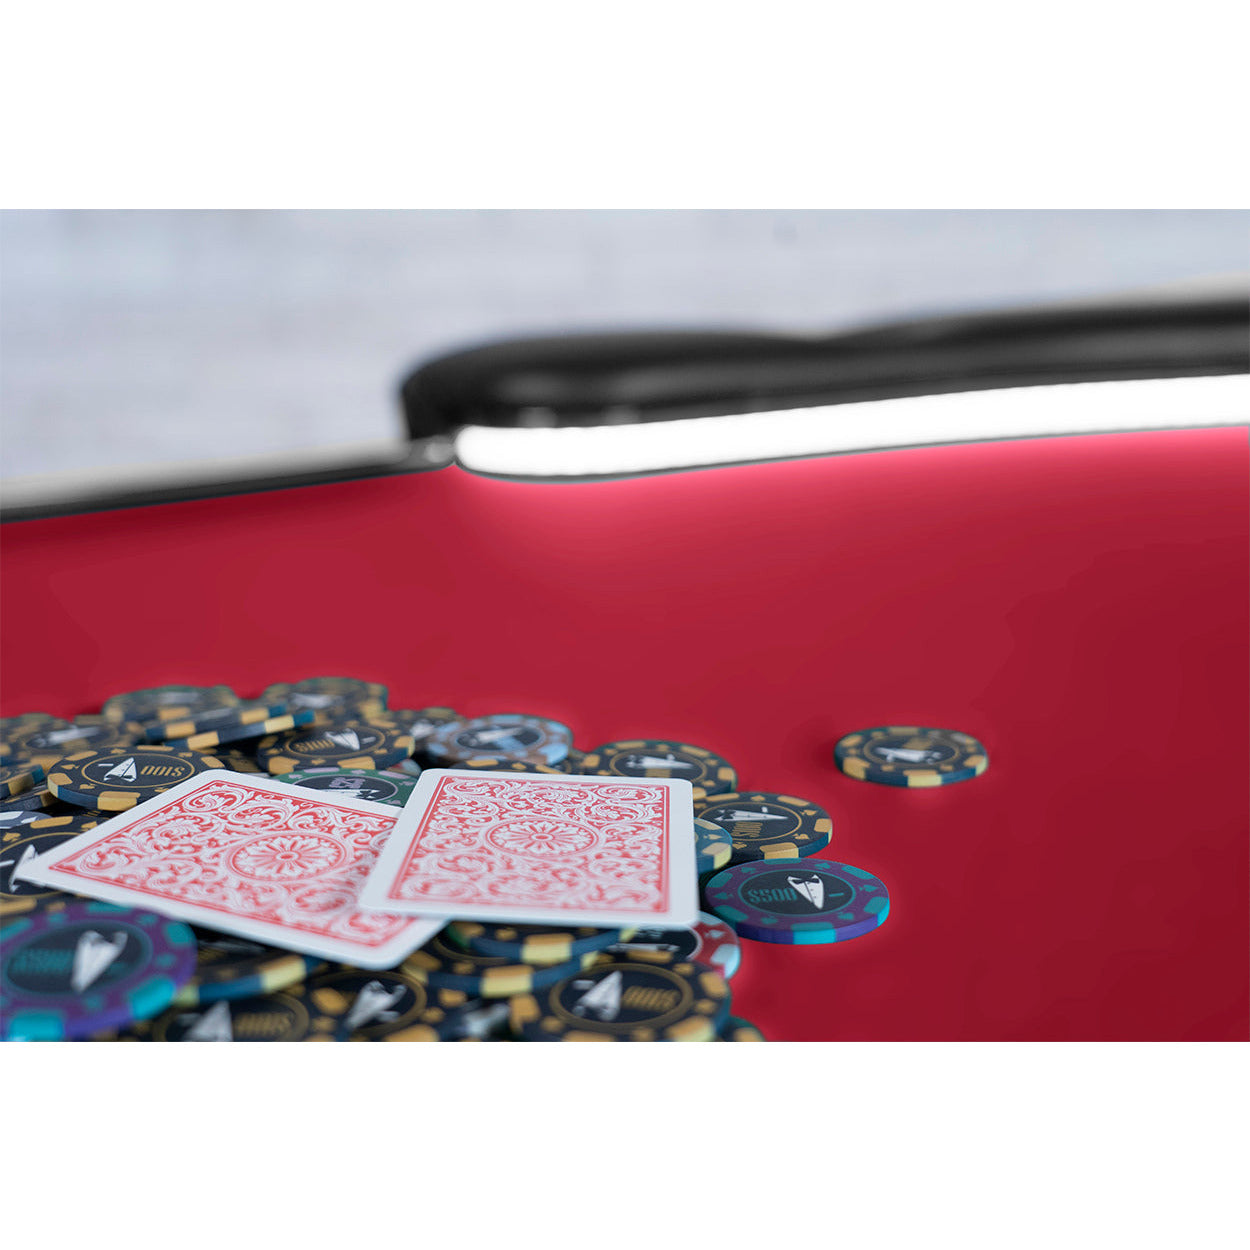 BBO The Aces Pro Alpha Folding Poker Table red close up of cards and chips 